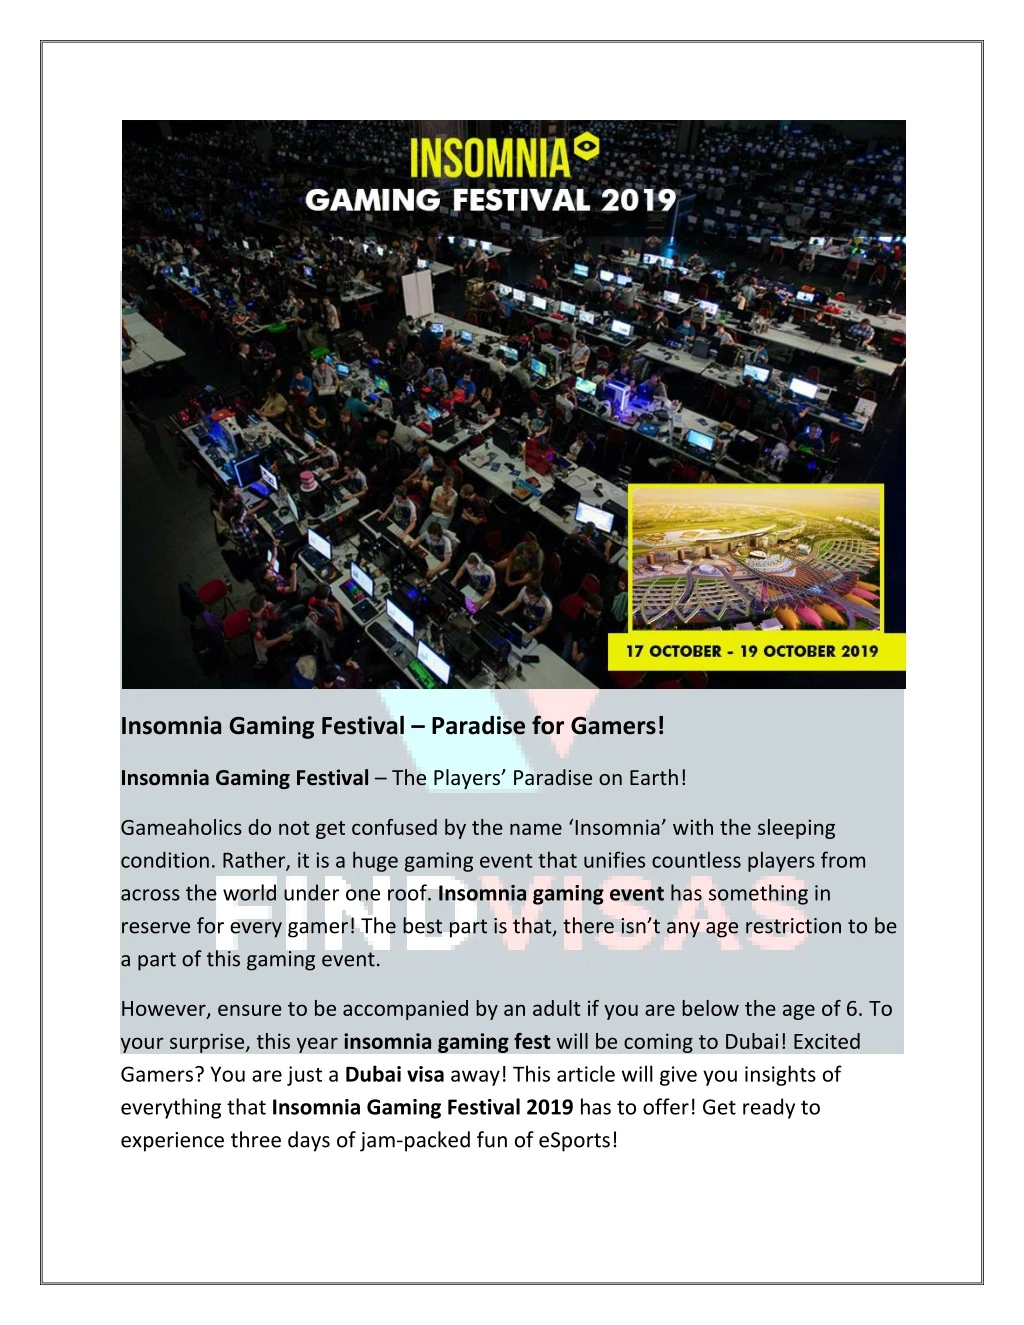 insomnia gaming festival paradise for gamers